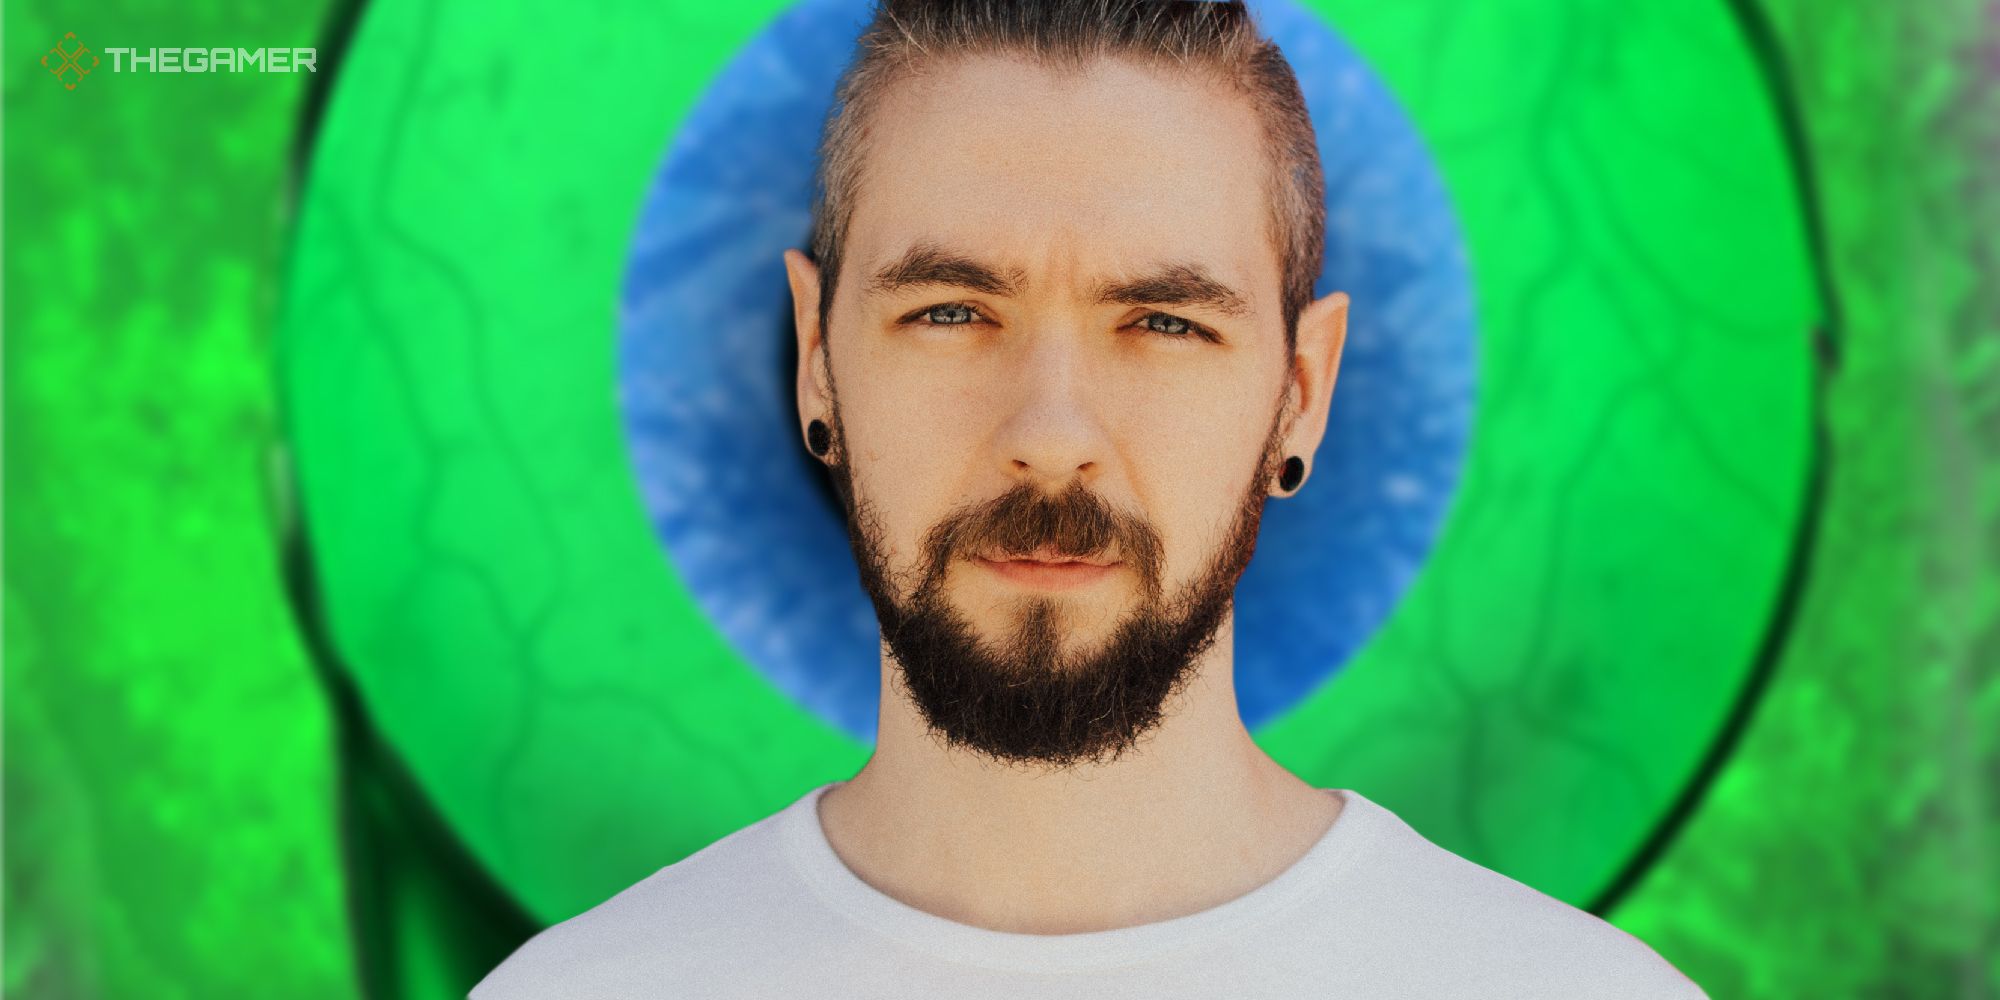 youtuber jacksepticeye in front of a septic looking eye